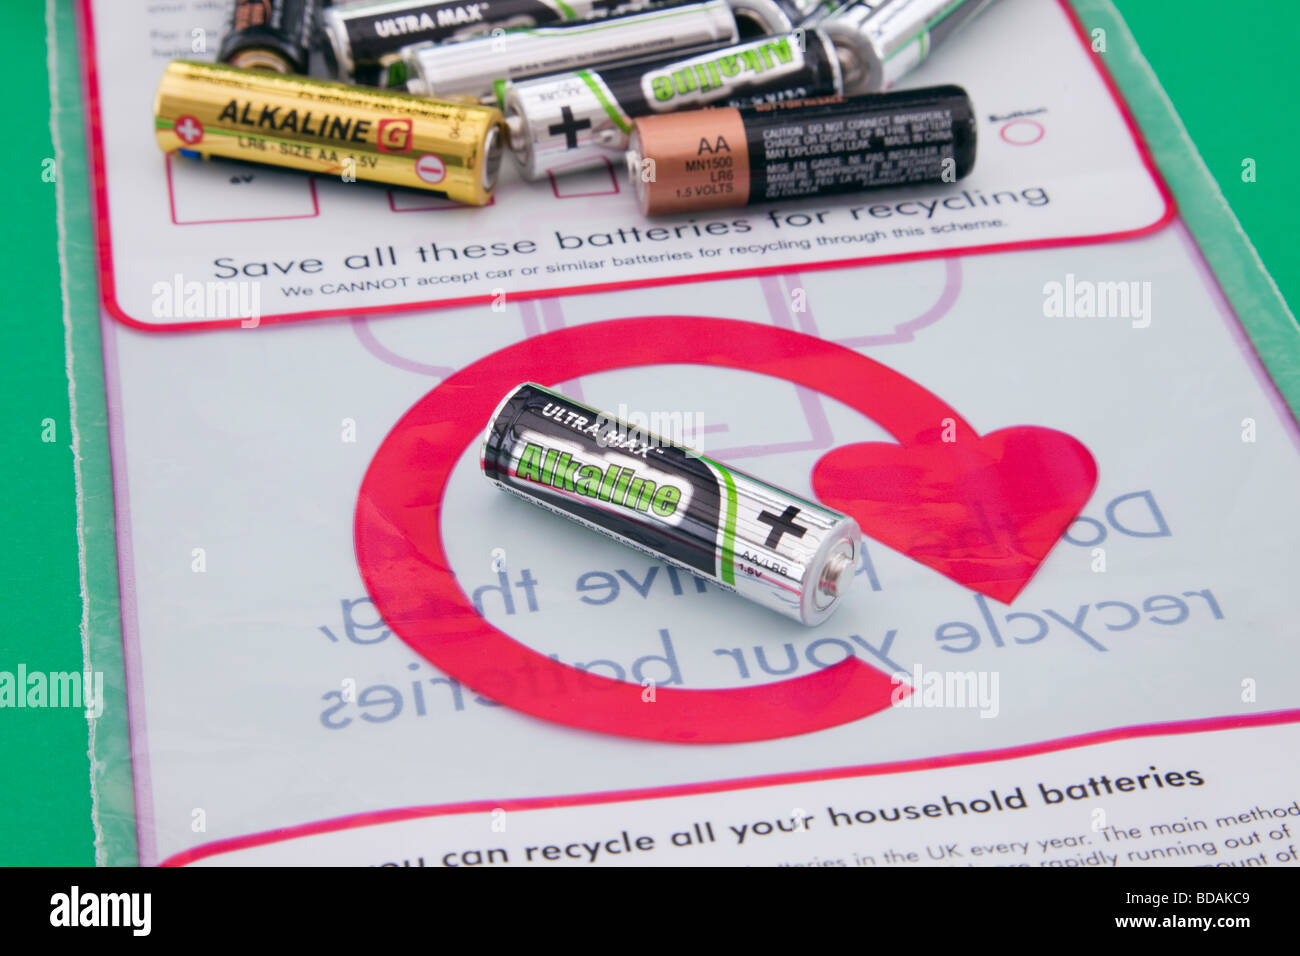 Used household batteries and battery recycling bag with logo. England UK Britain Stock Photo